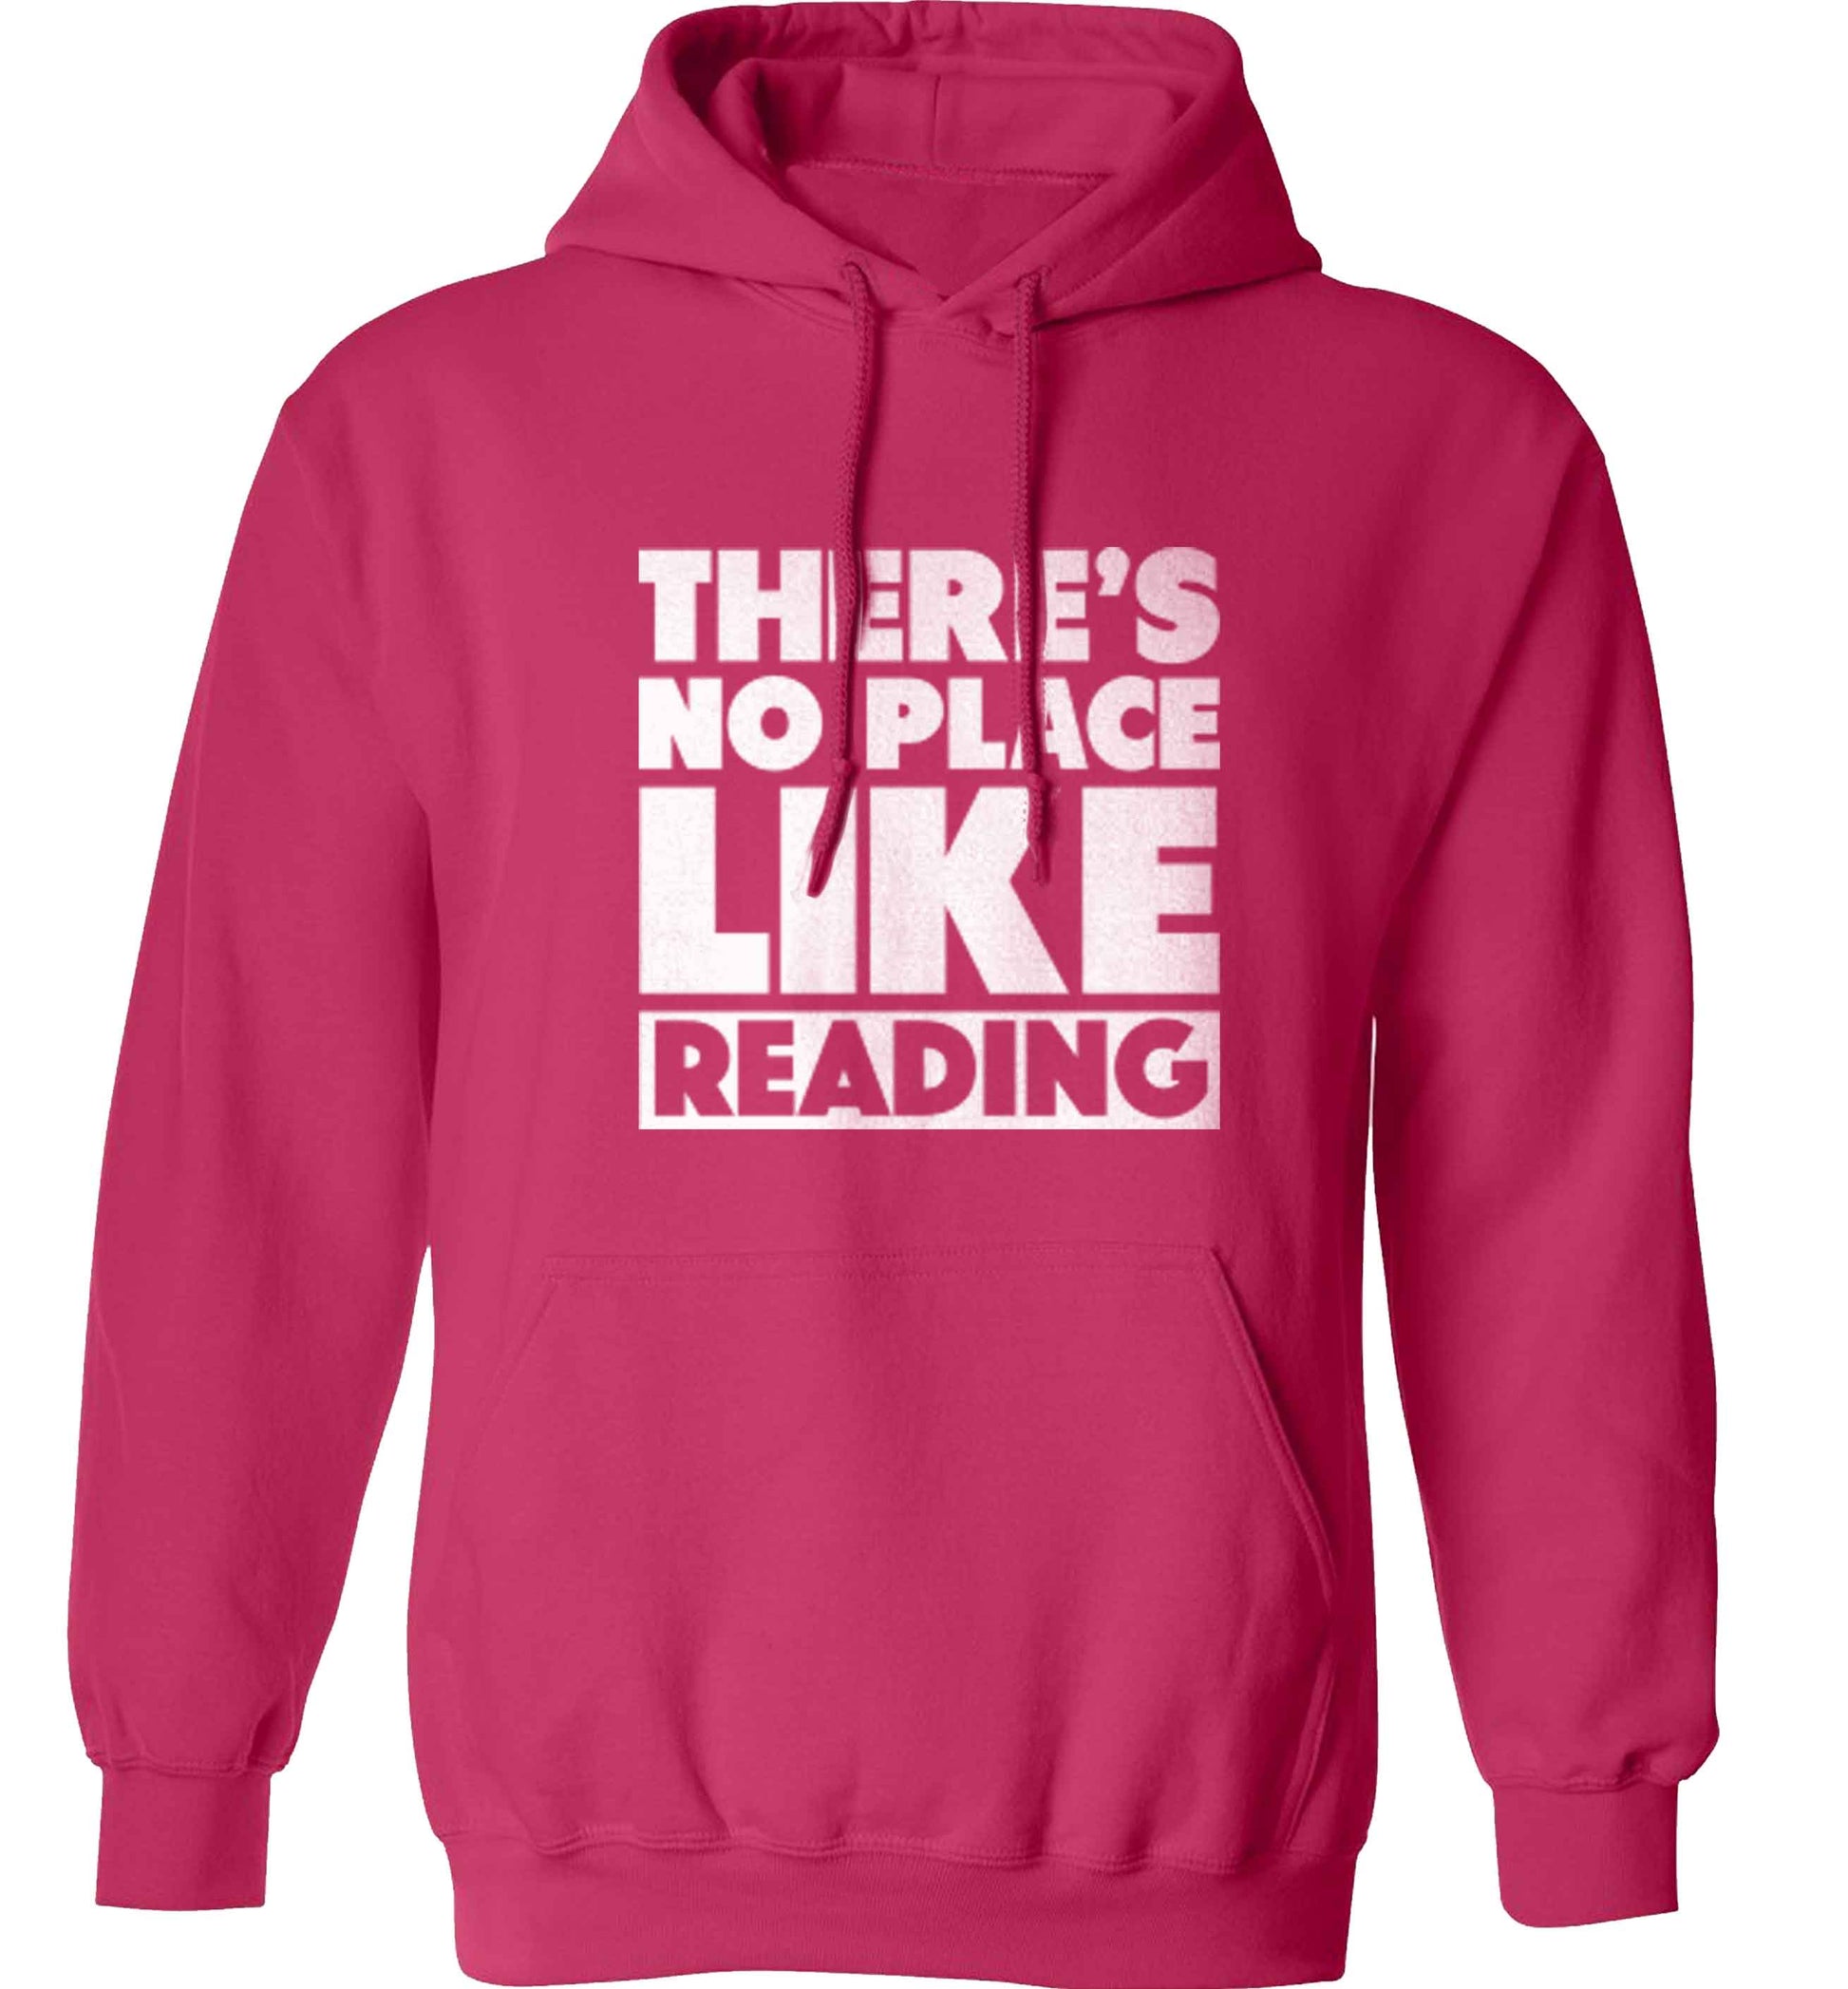 There's no place like Readingadults unisex pink hoodie 2XL